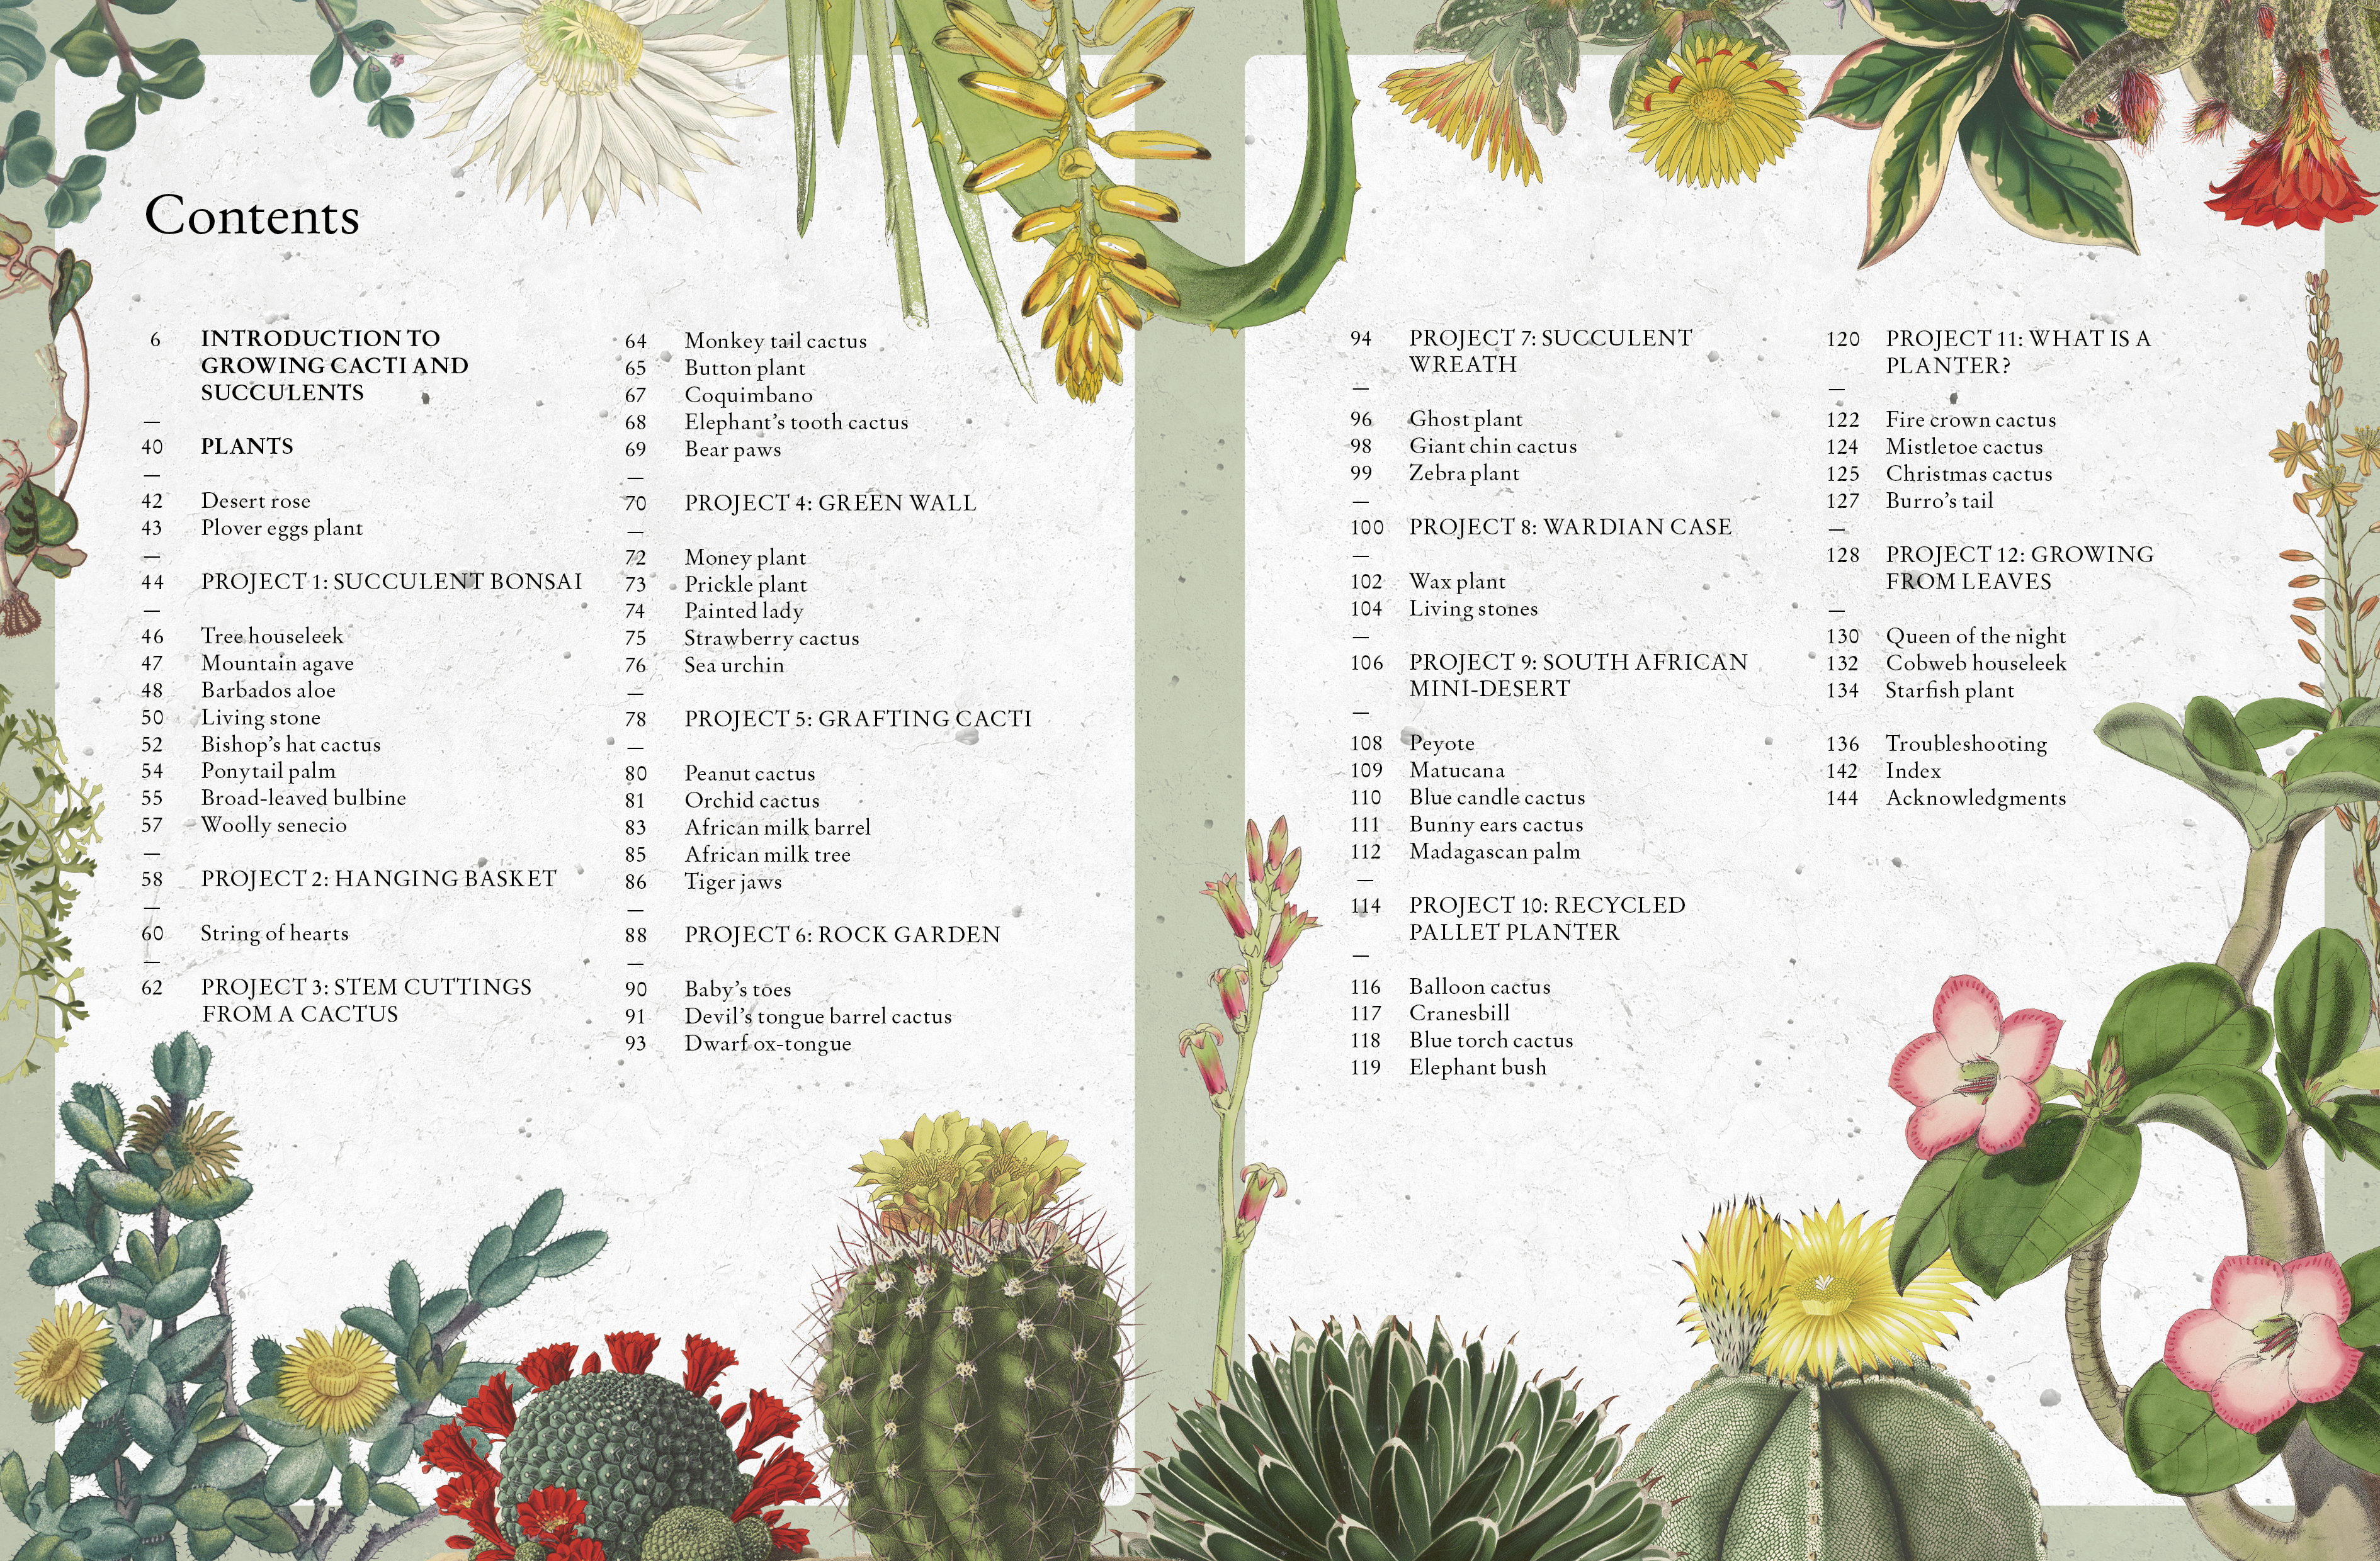 Kew Gardener's Guide to Growing Cacti and Succulents